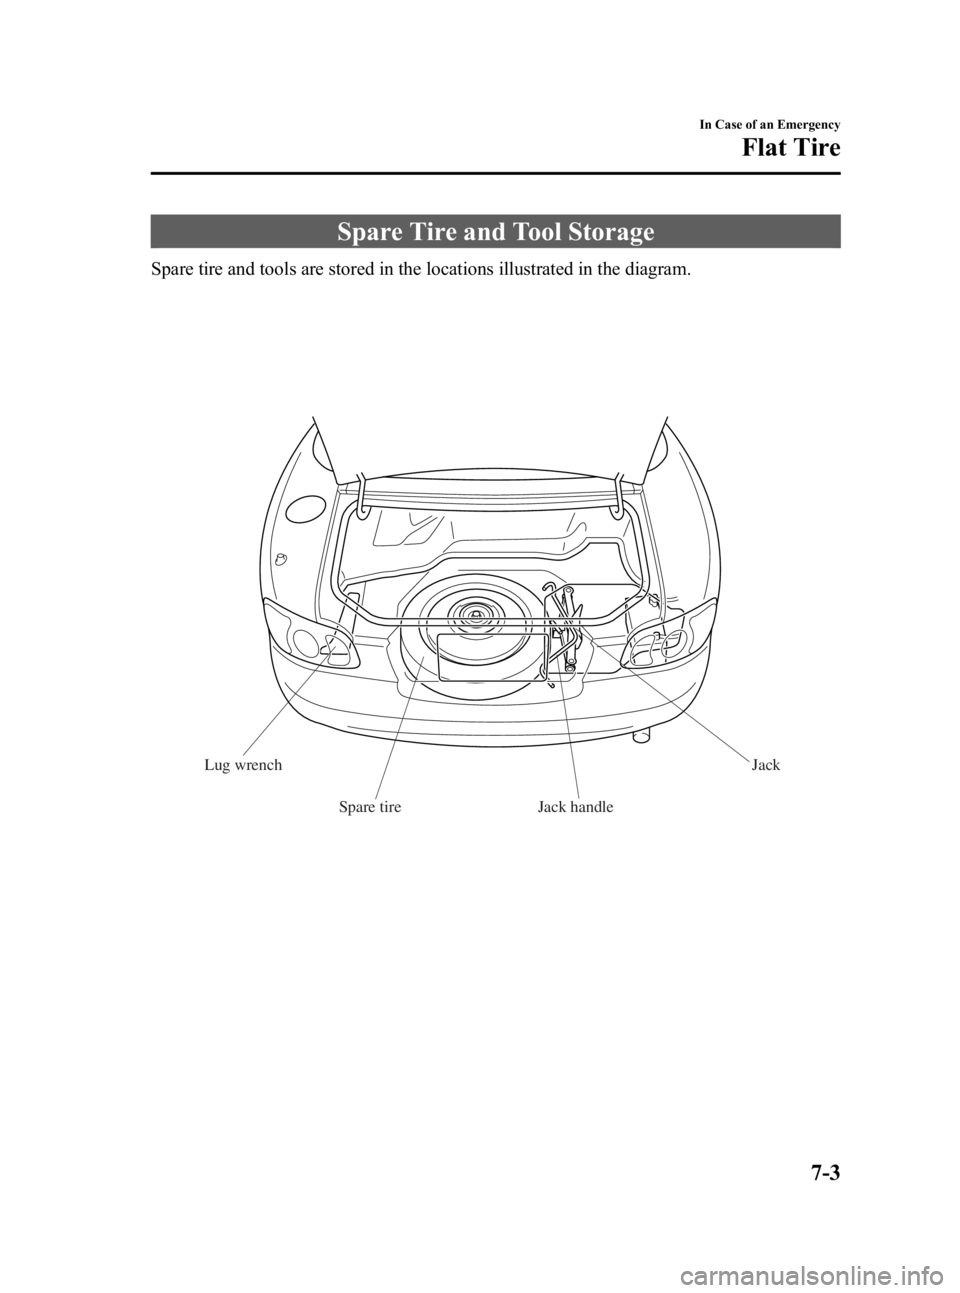 MAZDA MODEL SPEED MX-5 MIATA 2005  Owners Manual Black plate (201,1)
Spare Tire and Tool Storage
Spare tire and tools are stored in the locations illustrated in the diagram.
Lug wrenchSpare tire Jack handle Jack
In Case of an Emergency
Flat Tire
7-3